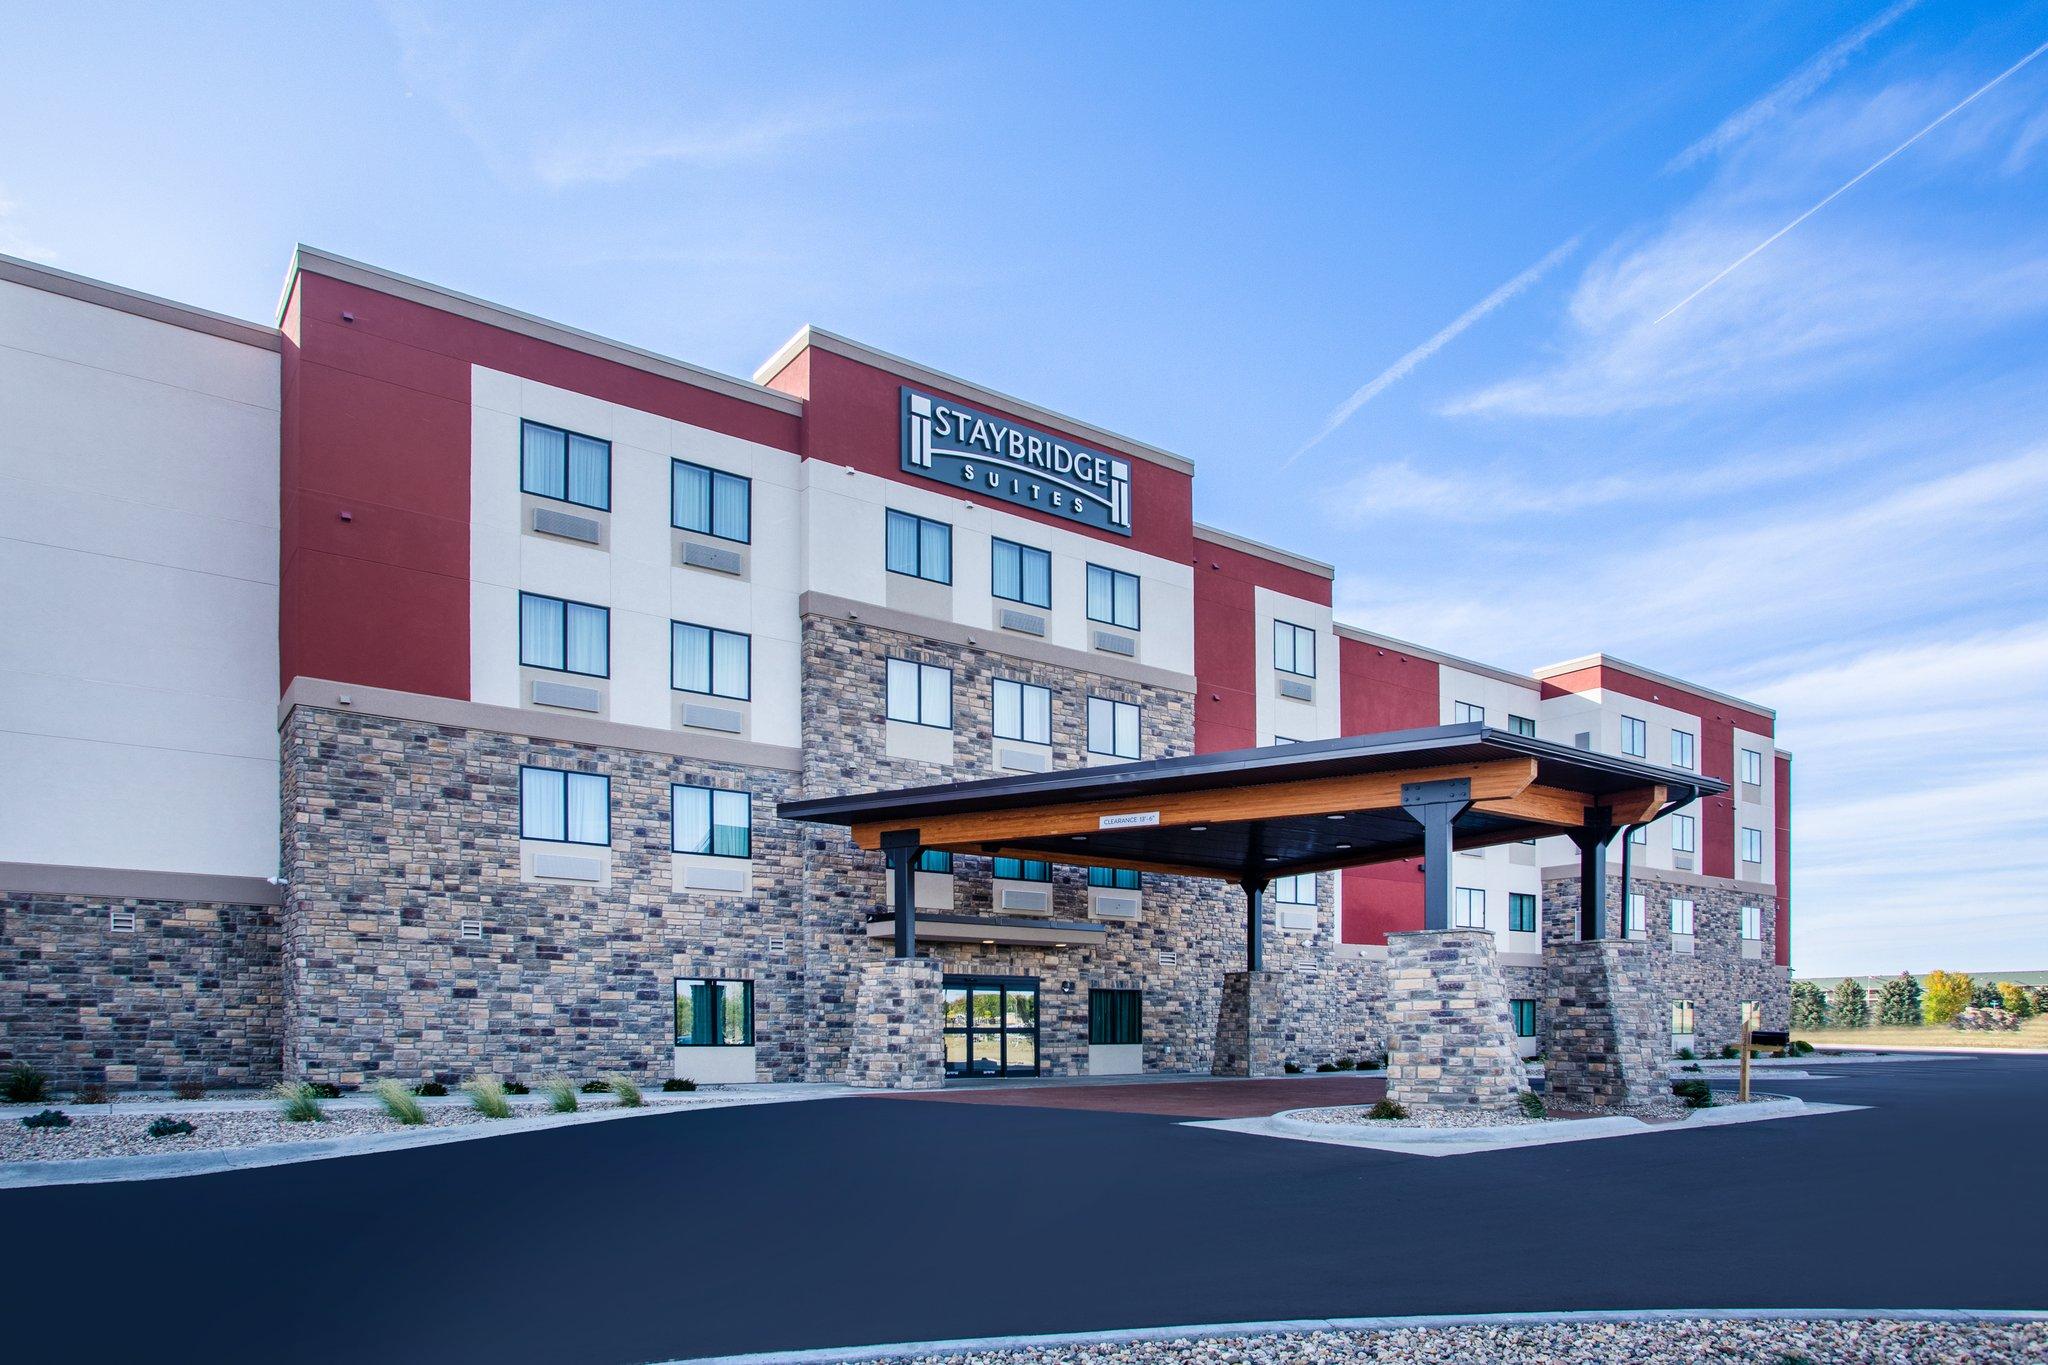 Staybridge Suites Sioux Falls Southwest in Sioux Falls, SD